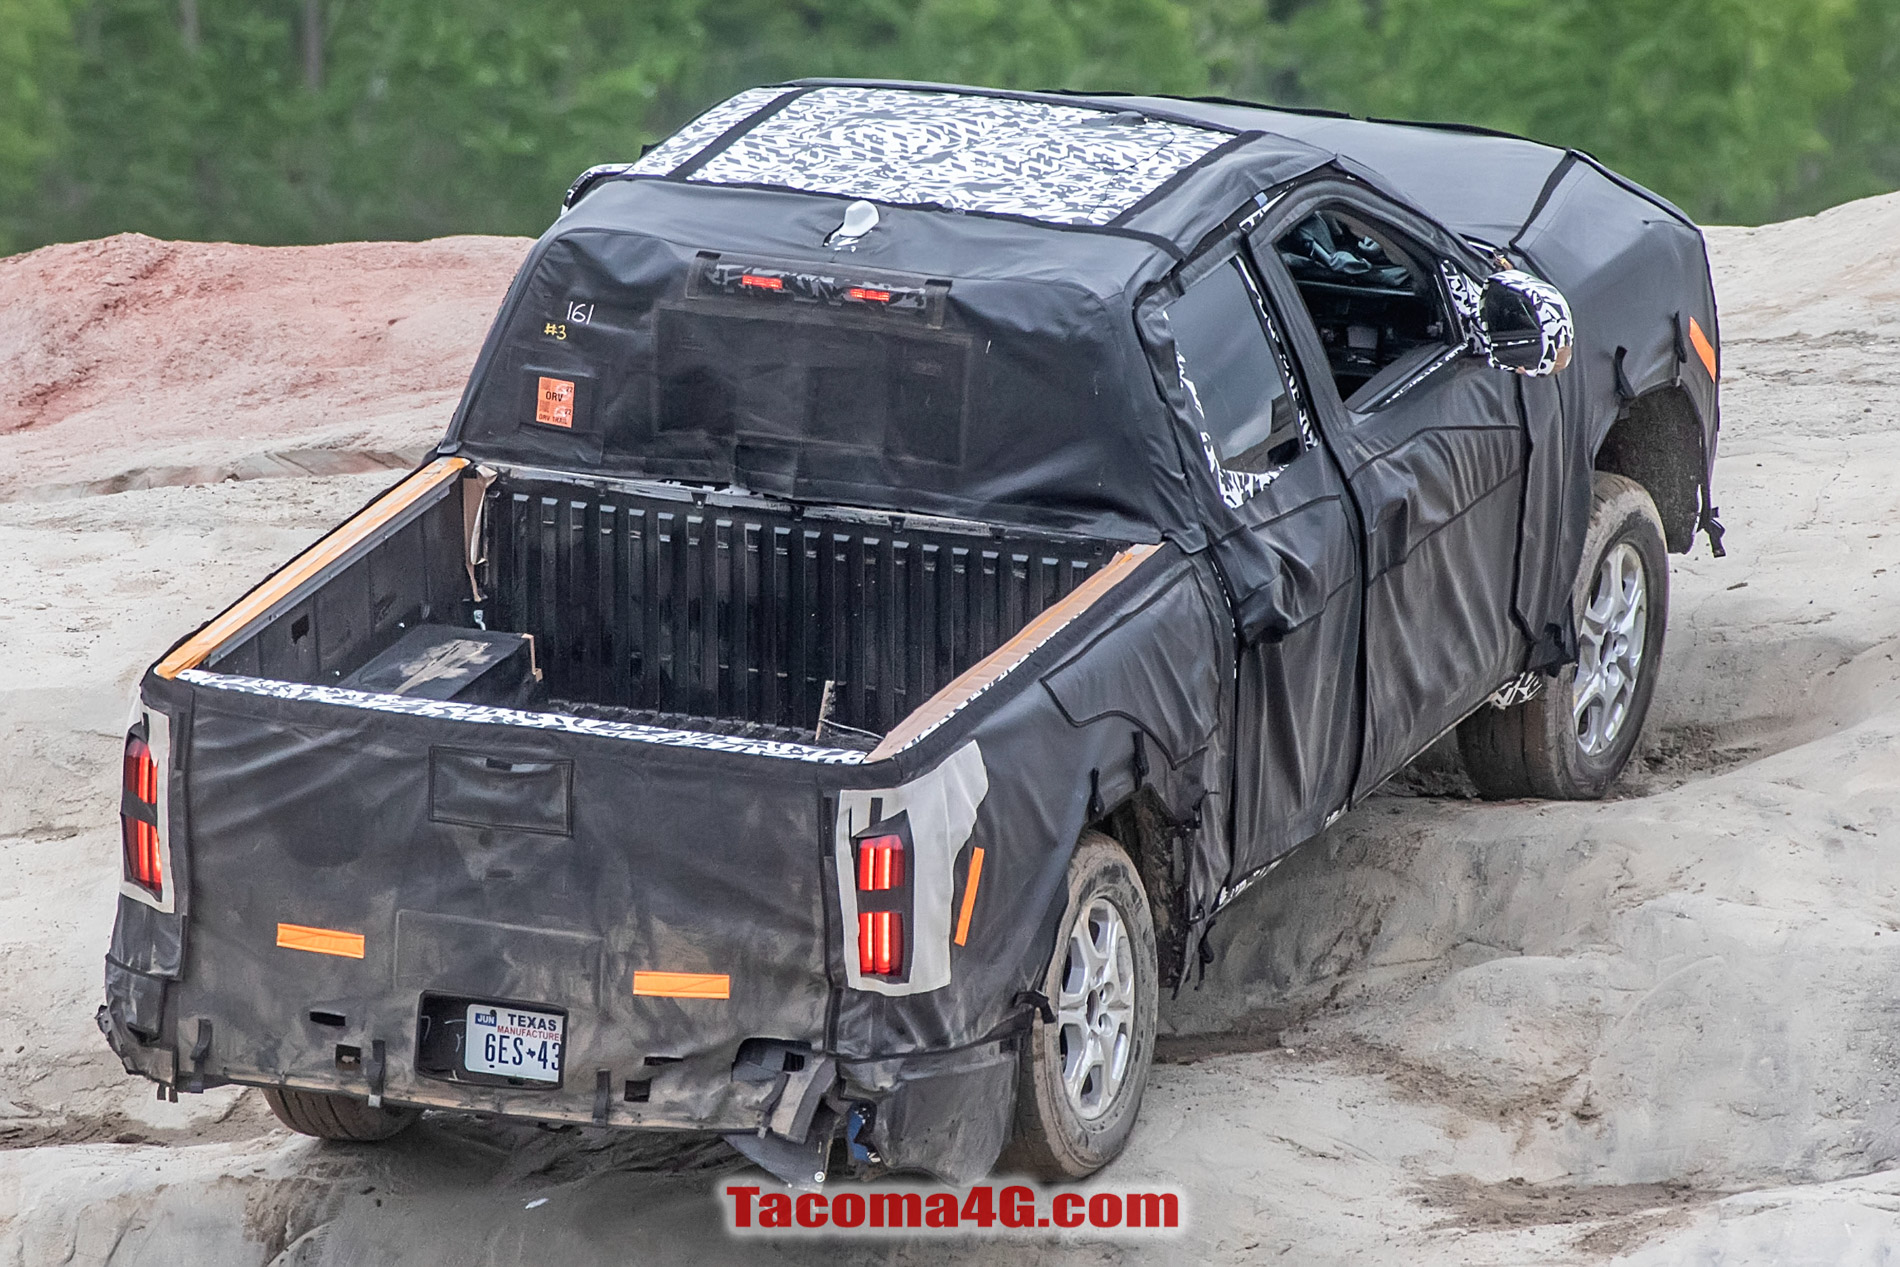 2024 Tacoma New 2024 Tacoma (4th Next Gen) Mule Off-Road Testing Reveals More Suspension Details -- 5/27/22 2024 Toyota Tacoma 4th gen spy photos suspension interior 19